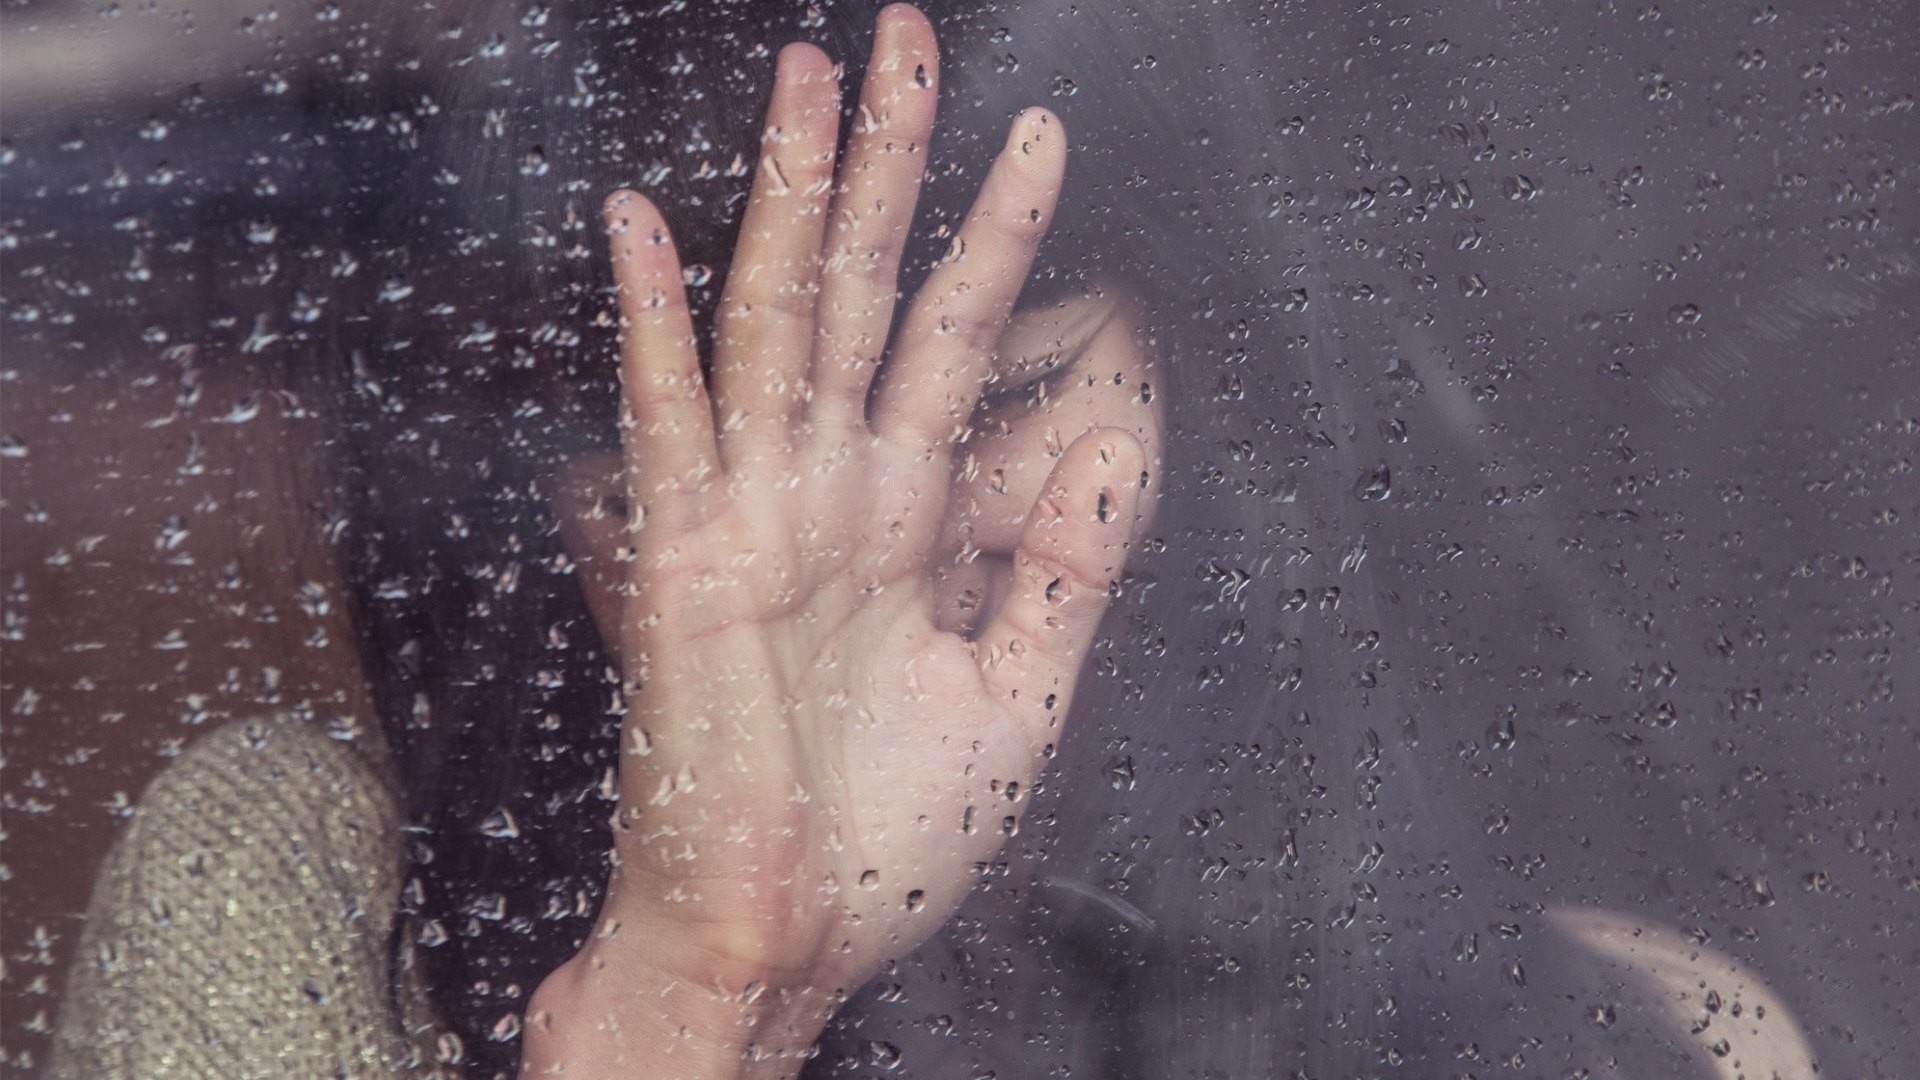 1920x1080 HD Wallpaper: Girl Behind Window in a Rainy Day